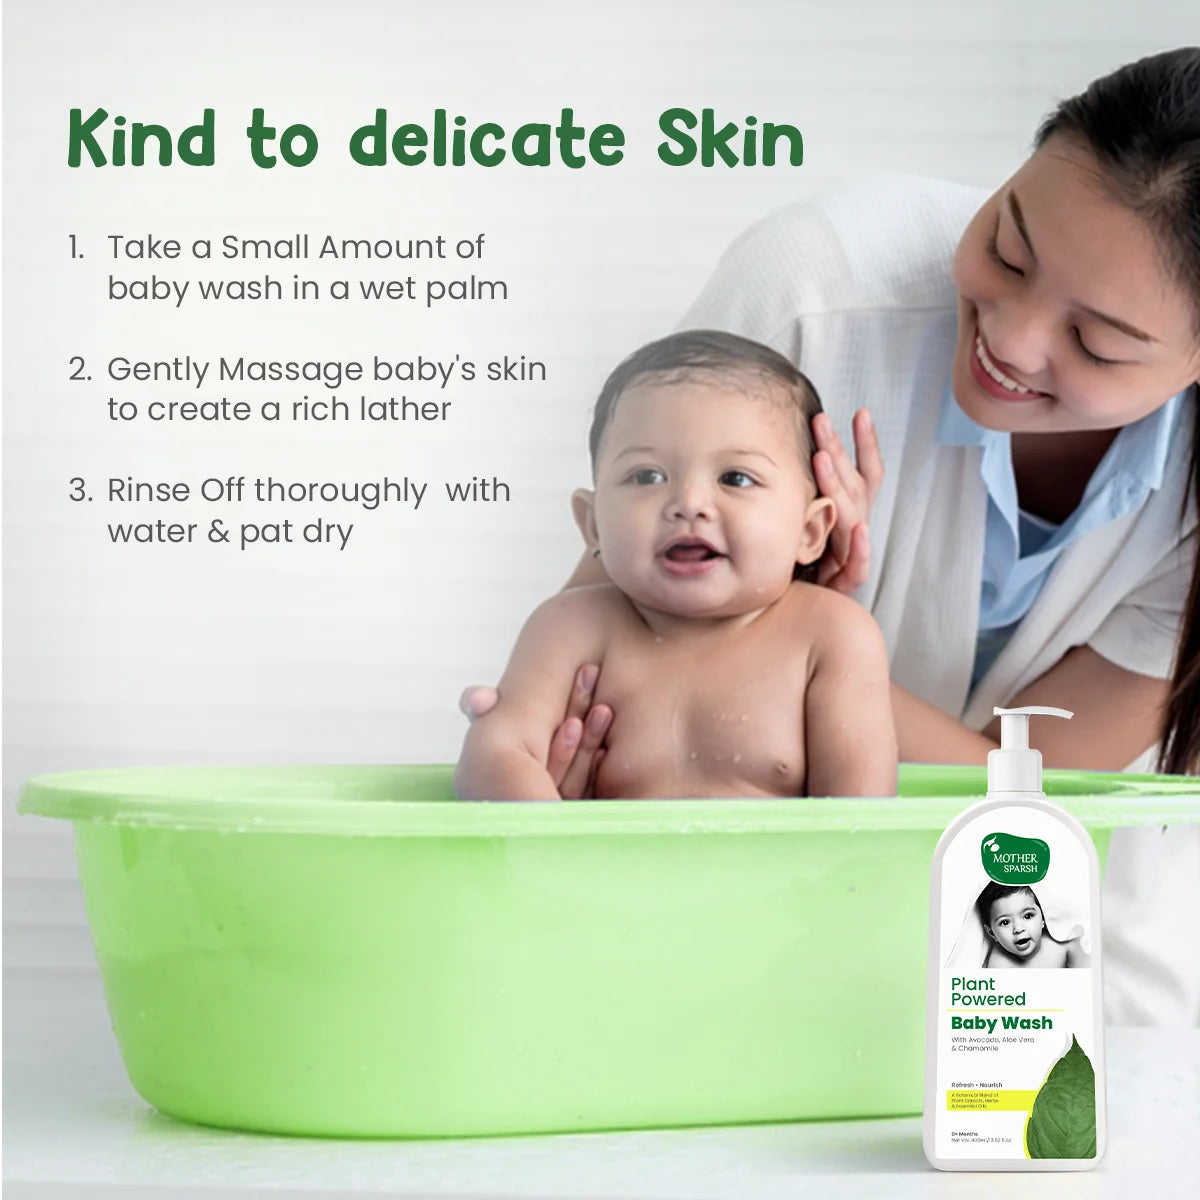 Plant Powered Baby Wash